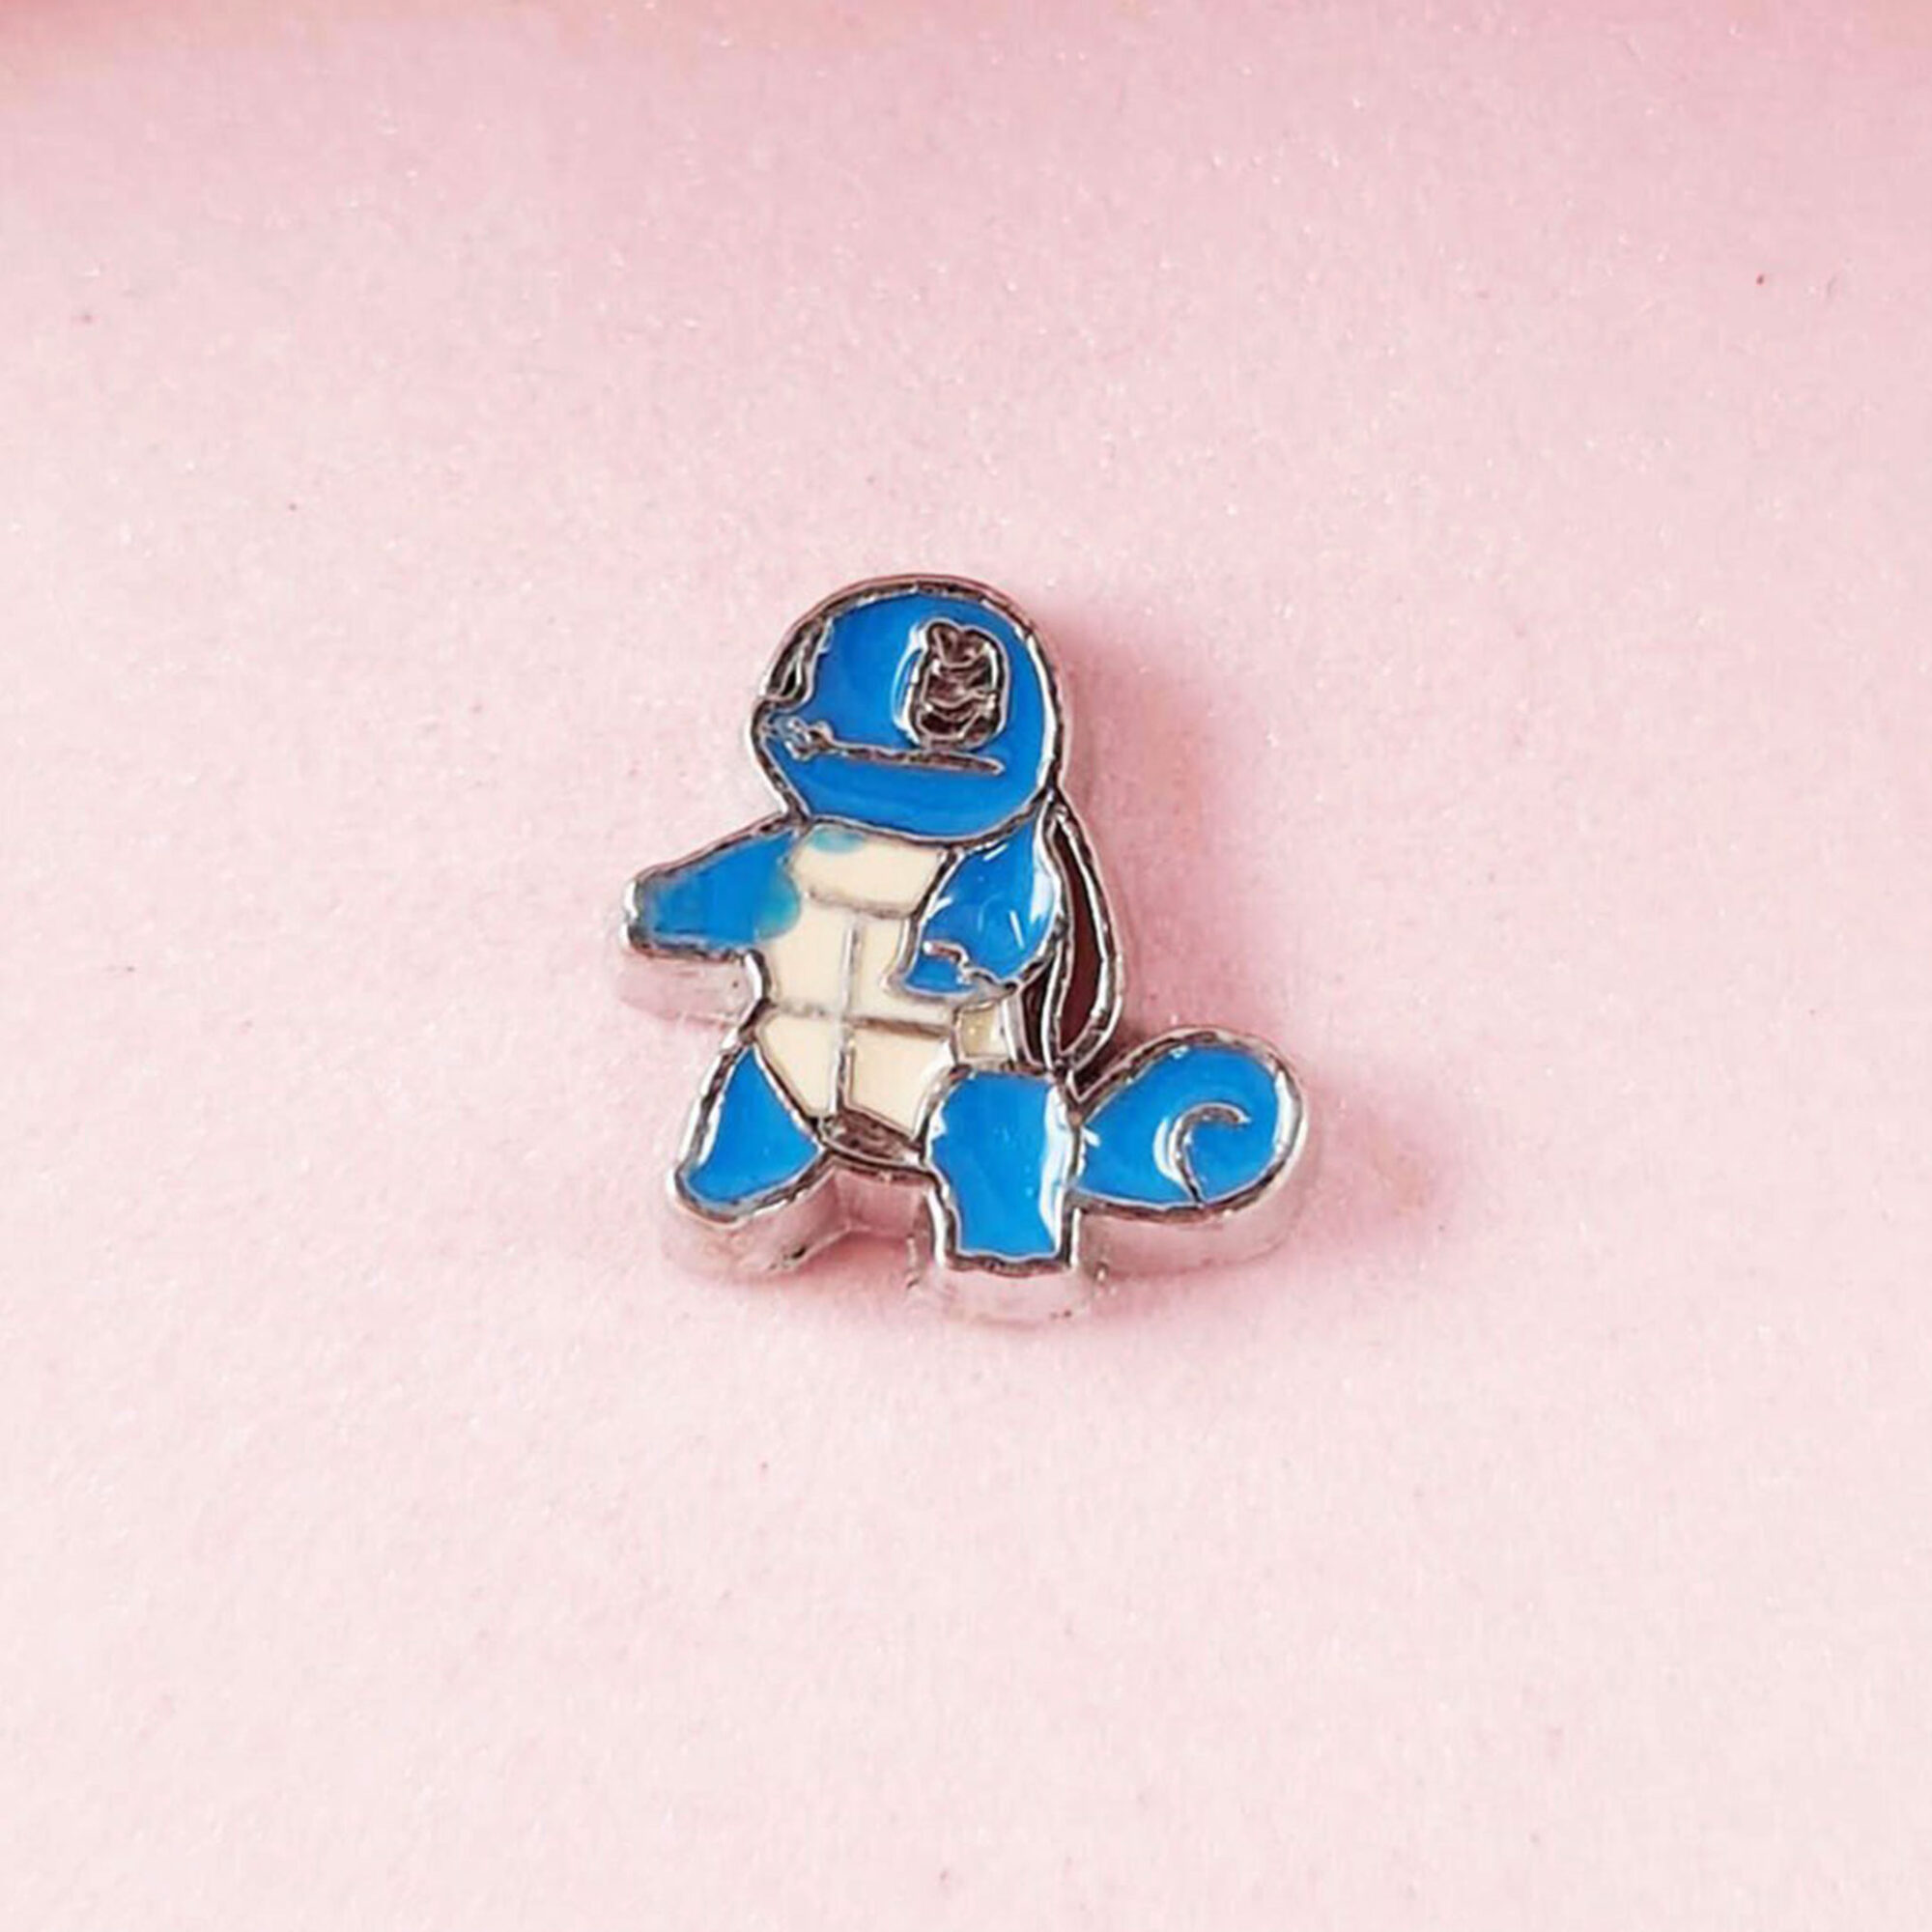 Pokemon Squirtle Floating Charm